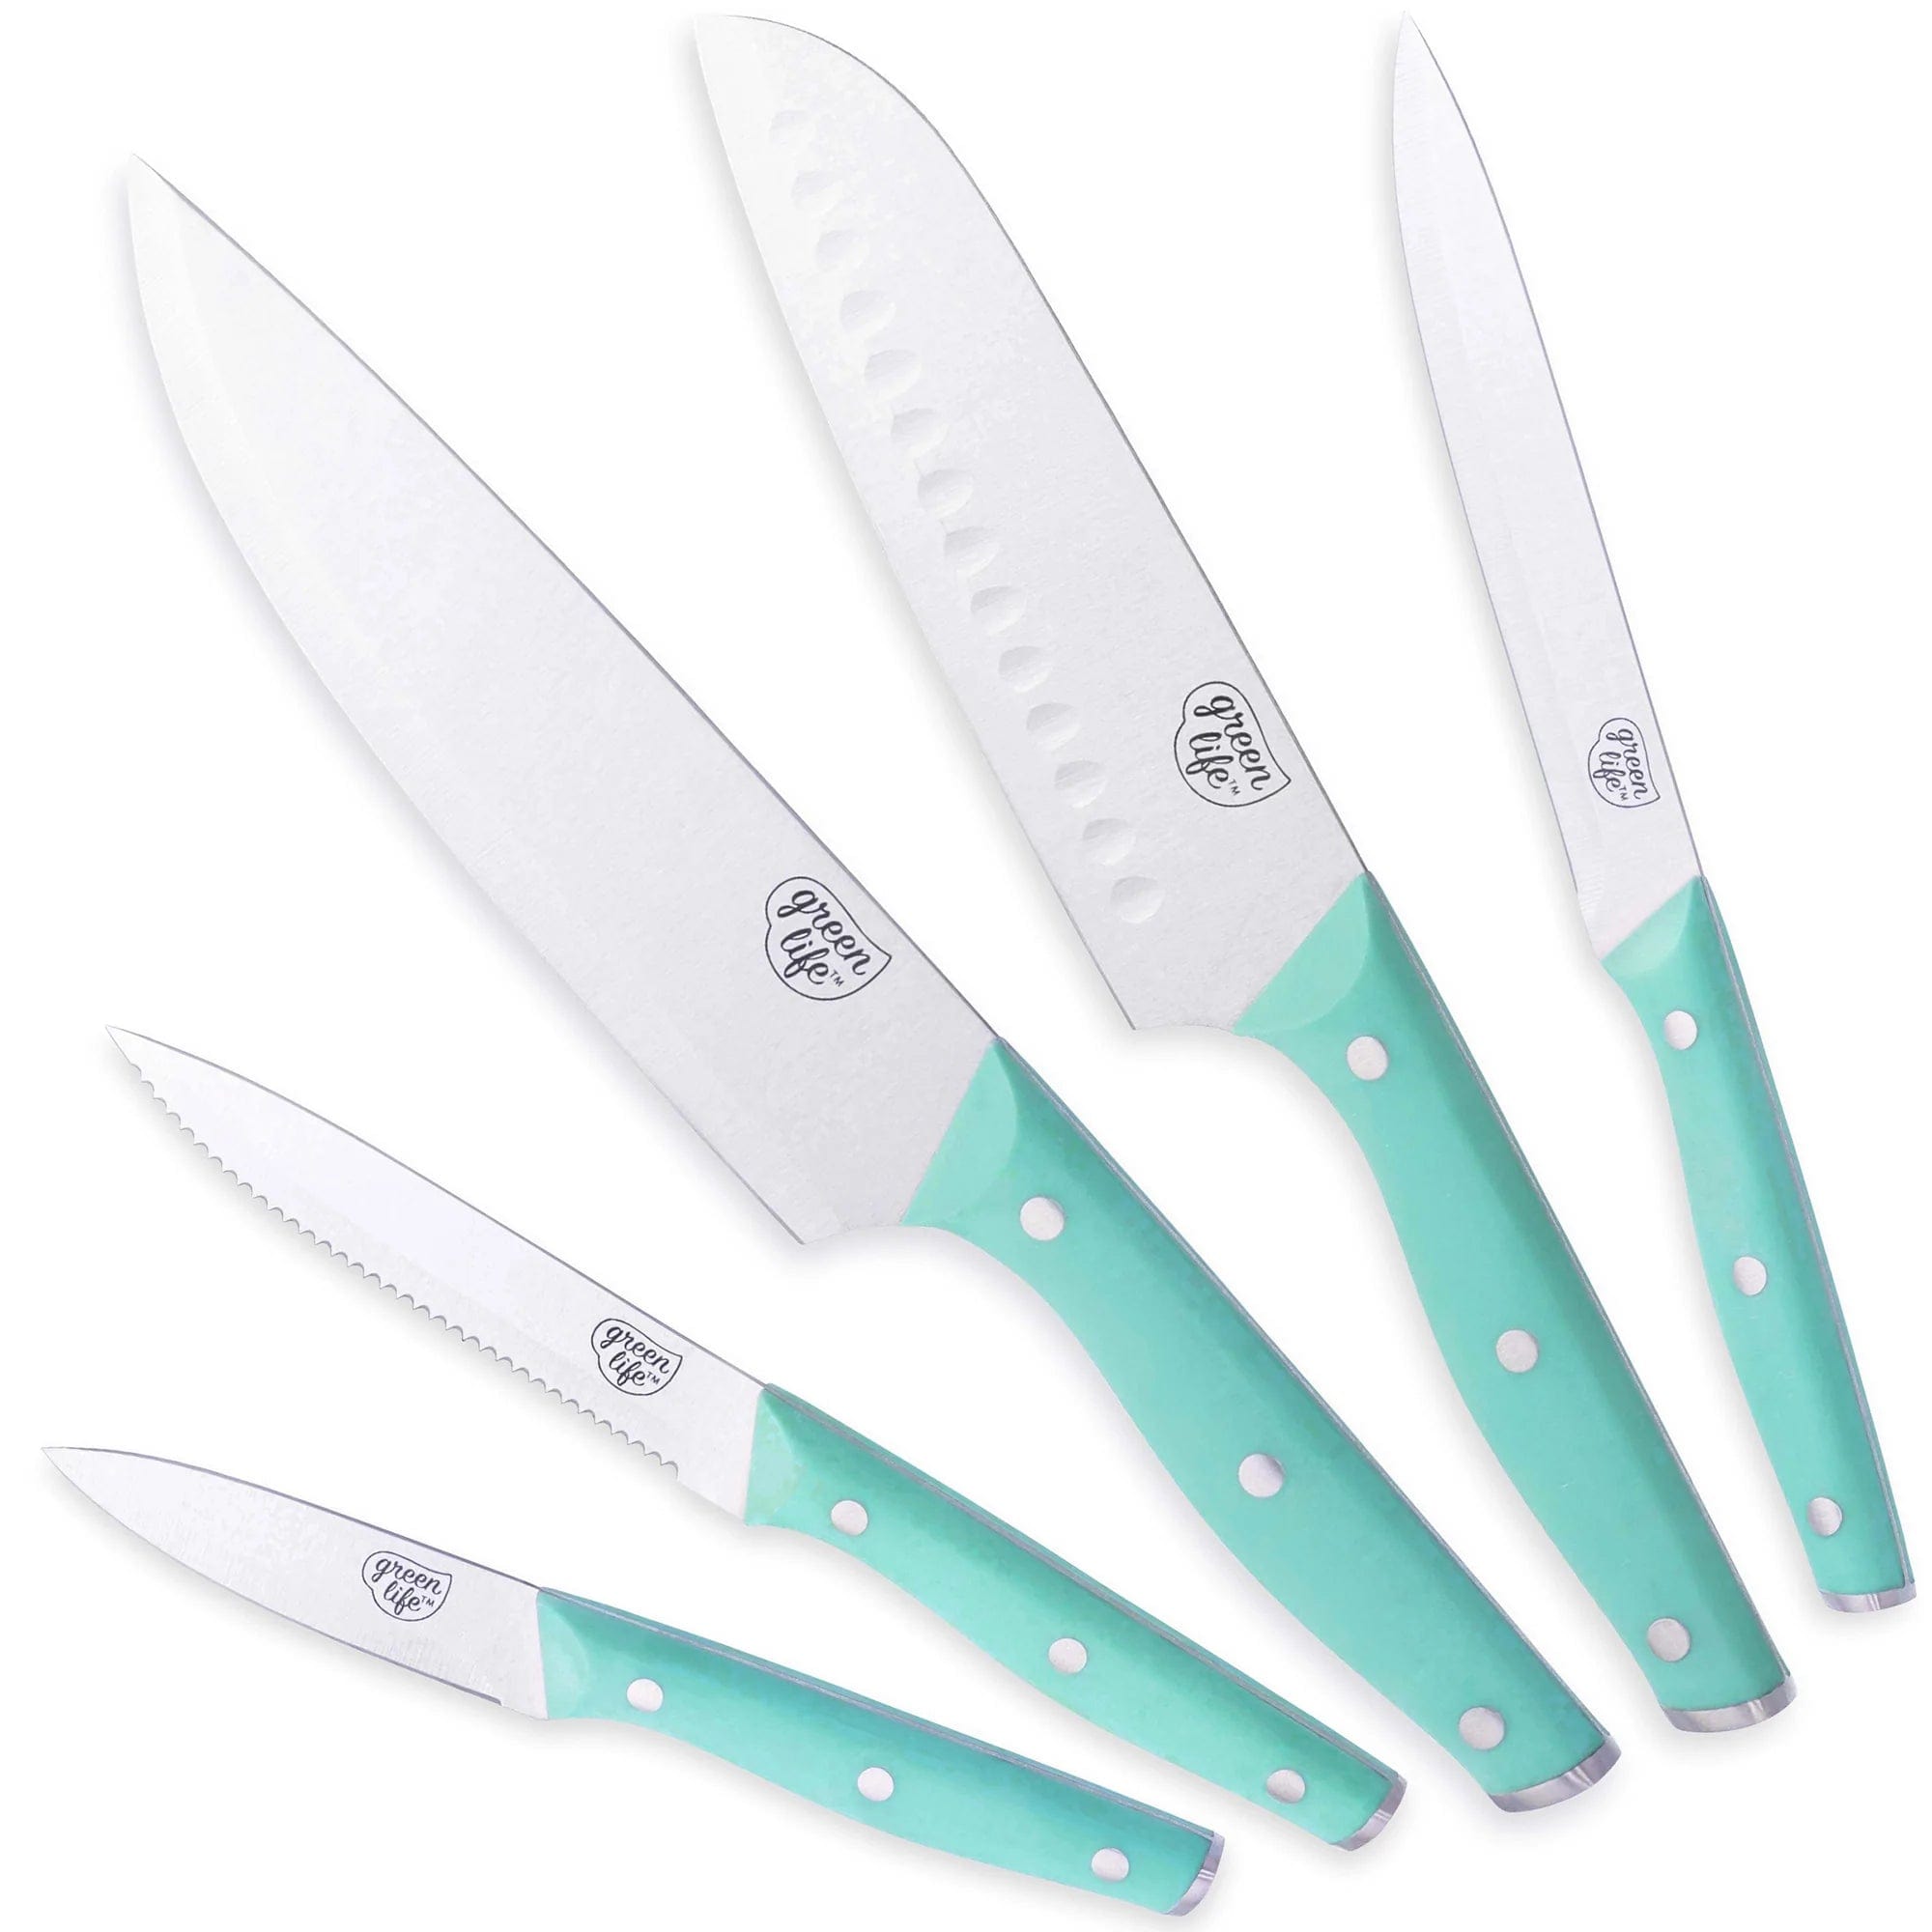 GreenLife High-Carbon Stainless Steel 5pc. Cutlery Set Turquoise CC005806-001